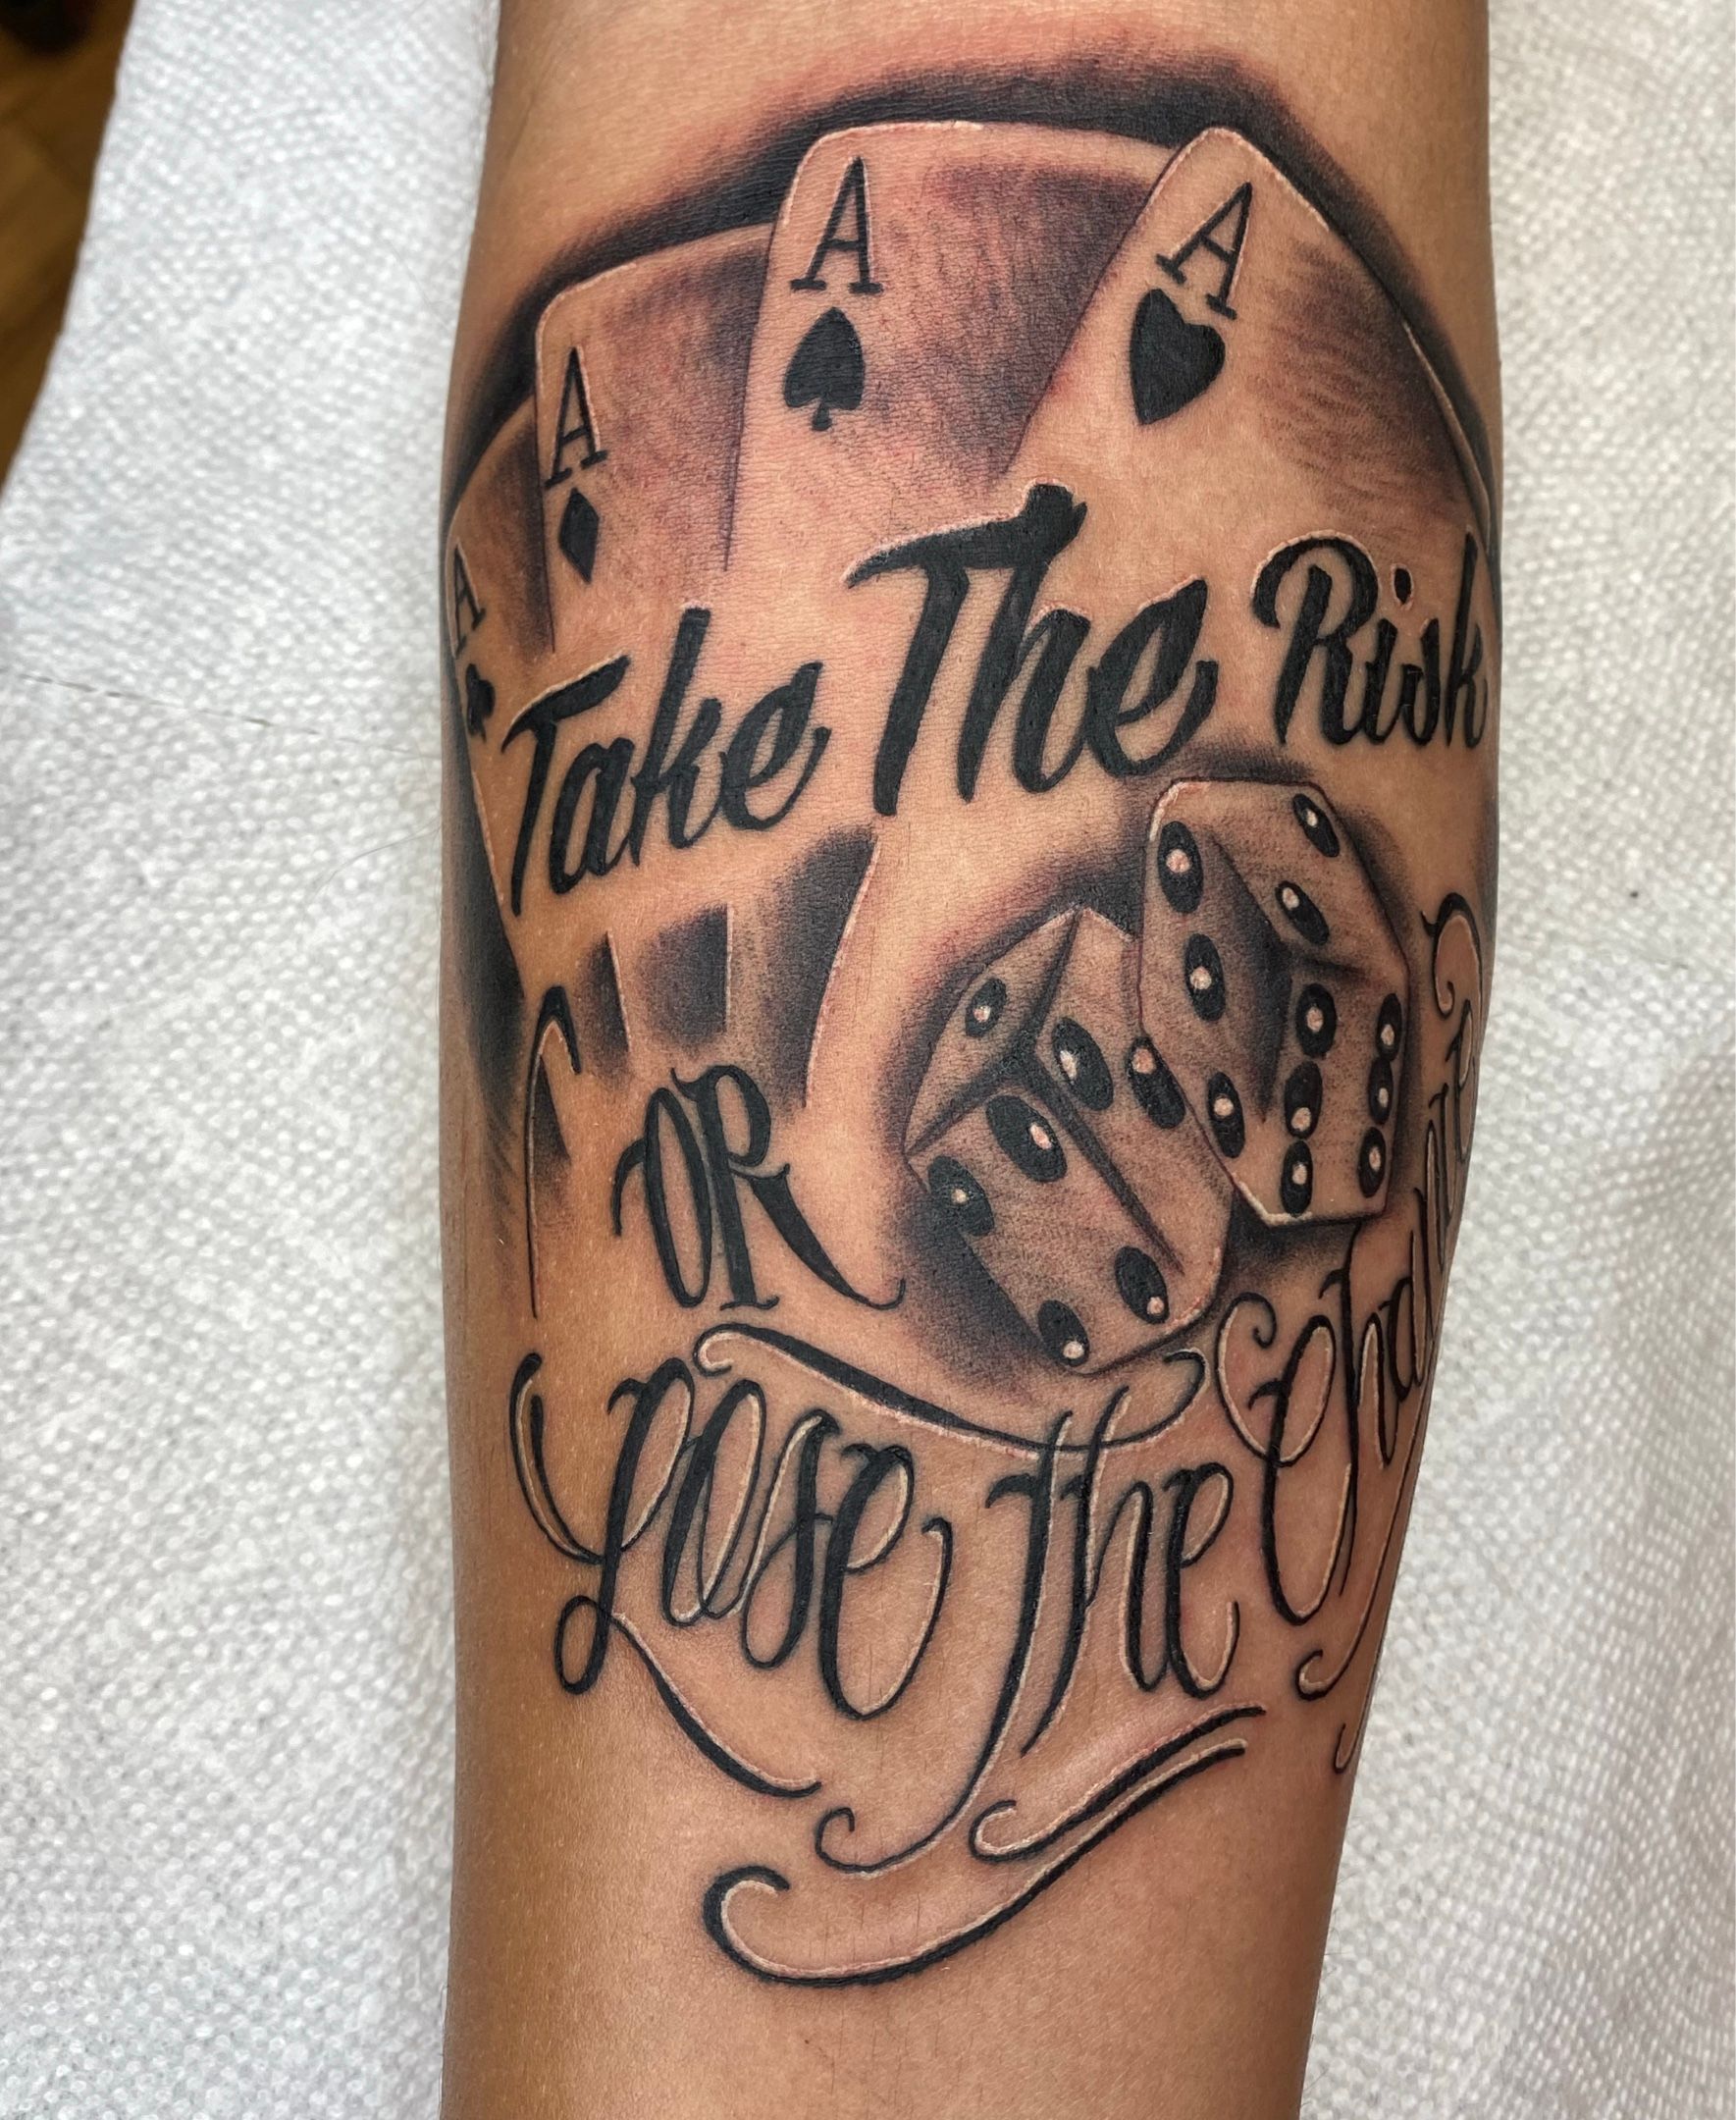 Andre Grays tattoo pays homage to civil rights activists  Daily Mail  Online